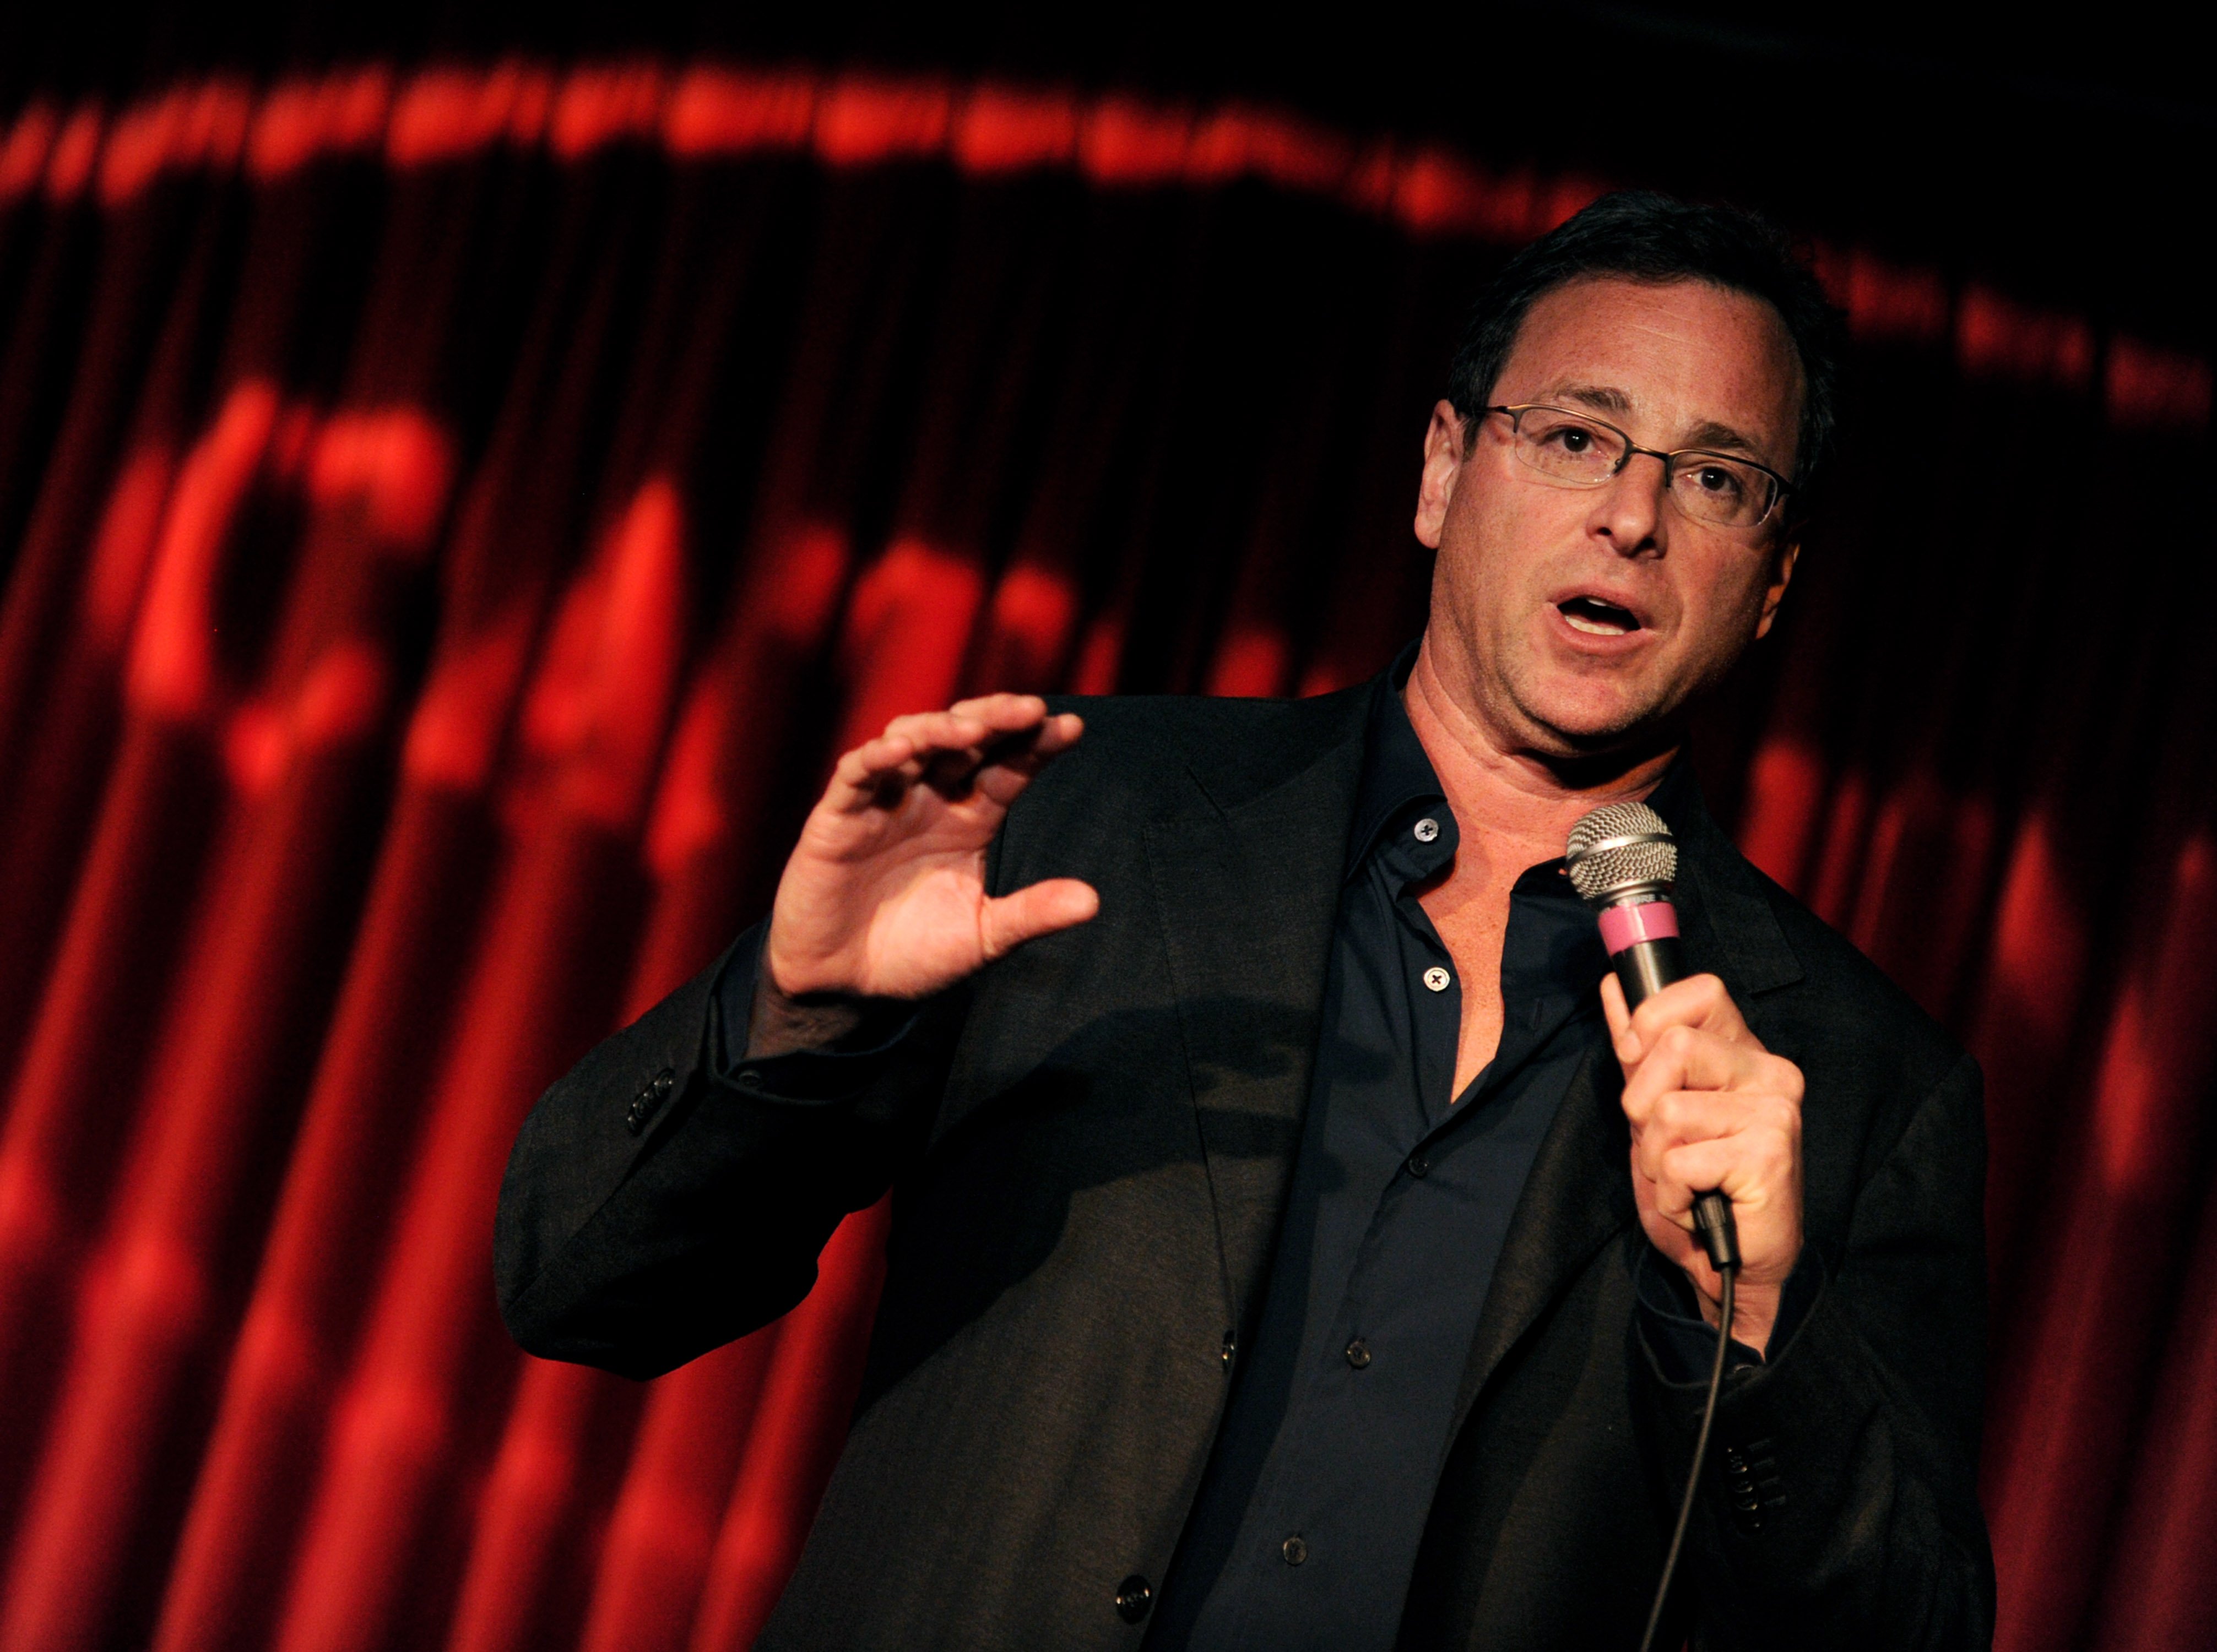 Bob Saget holding a microphone and performing